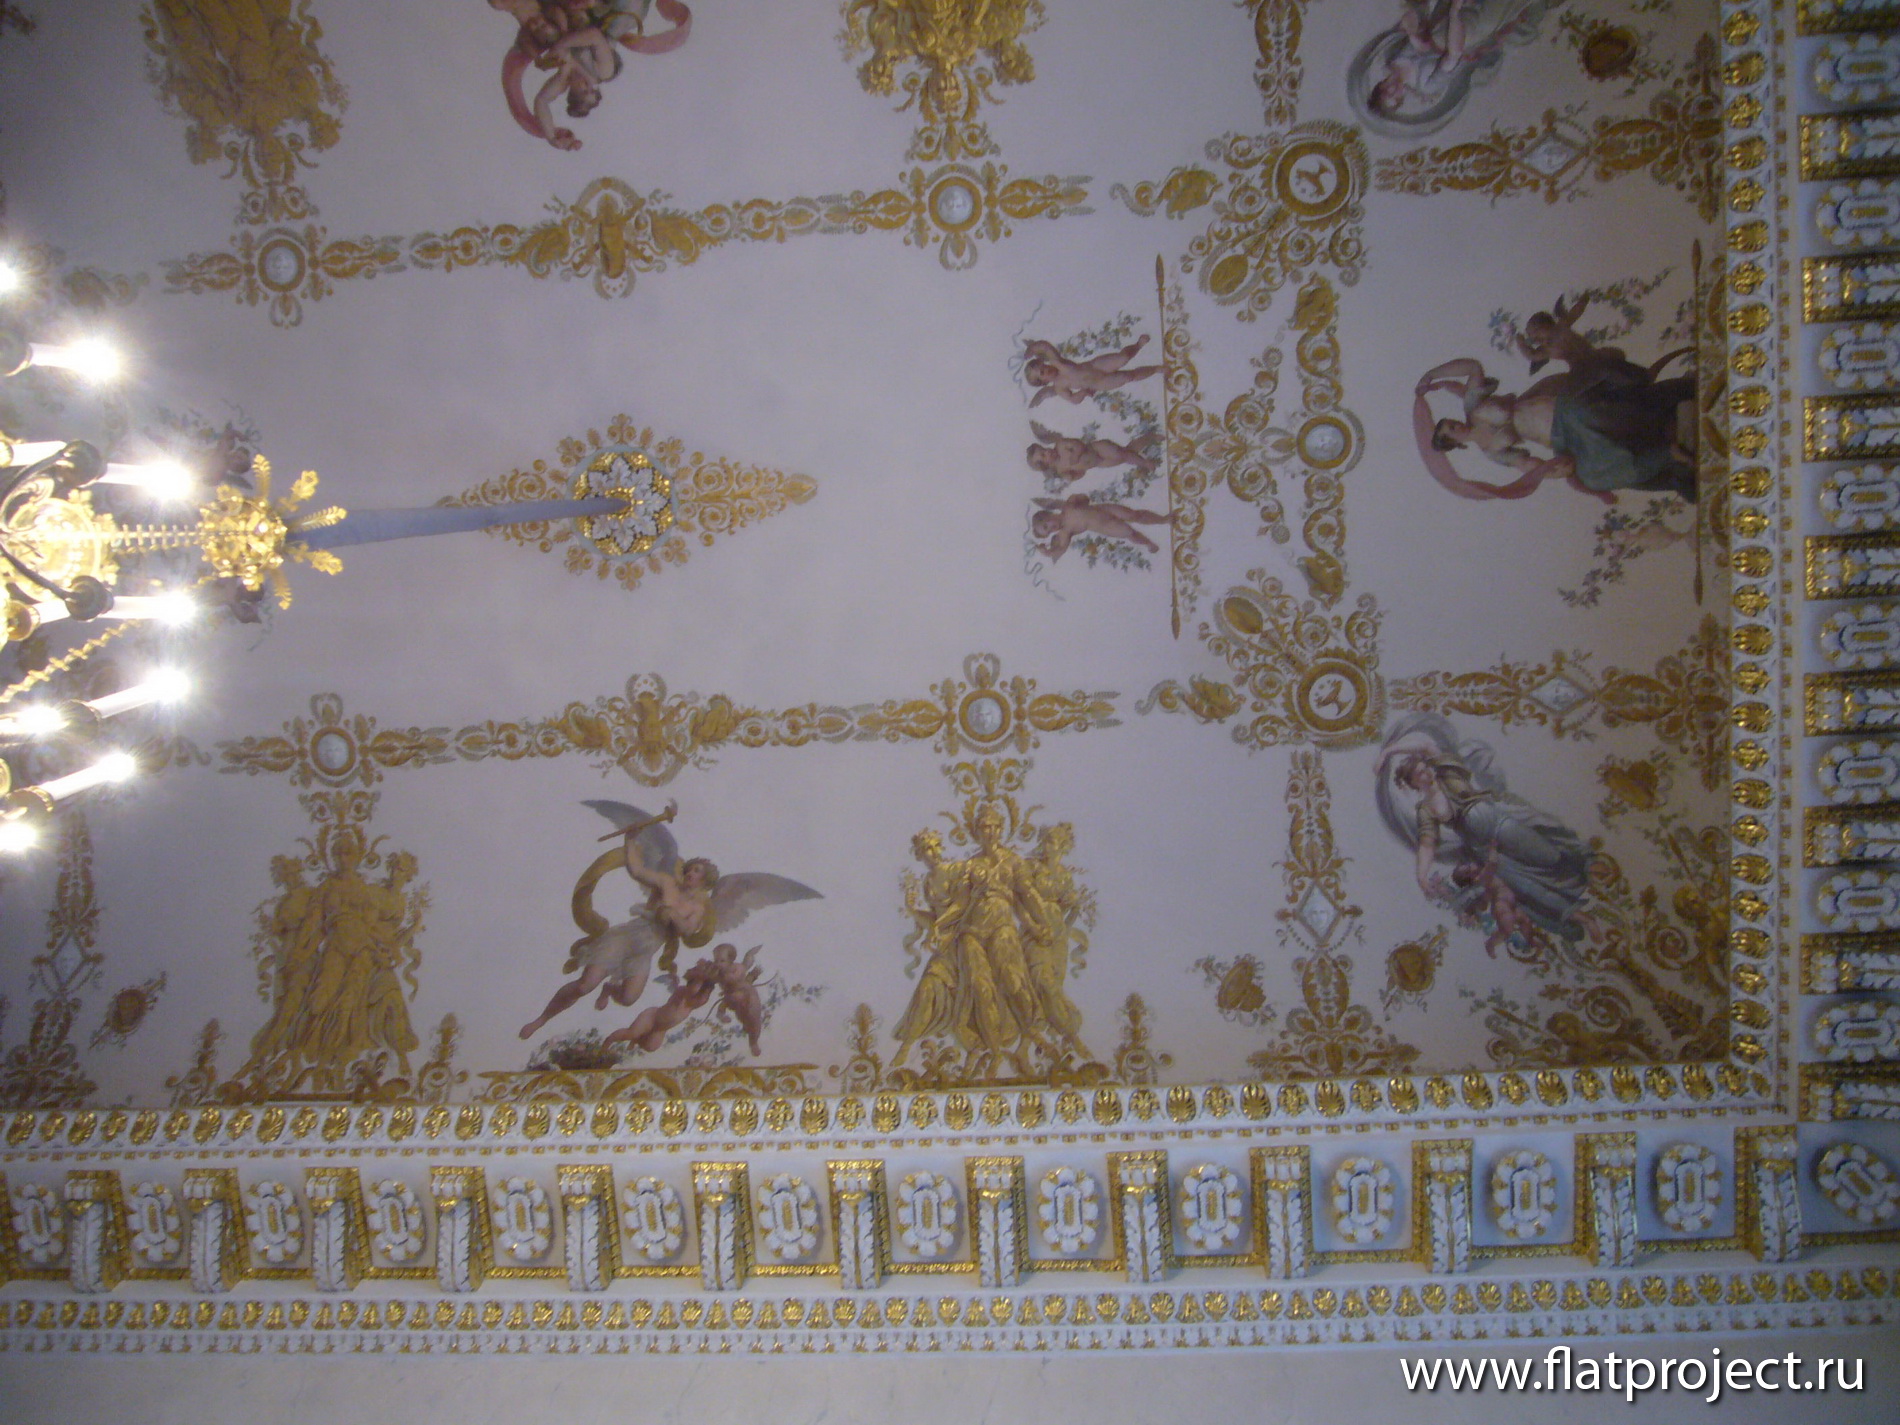 The State Russian museum interiors – photo 110